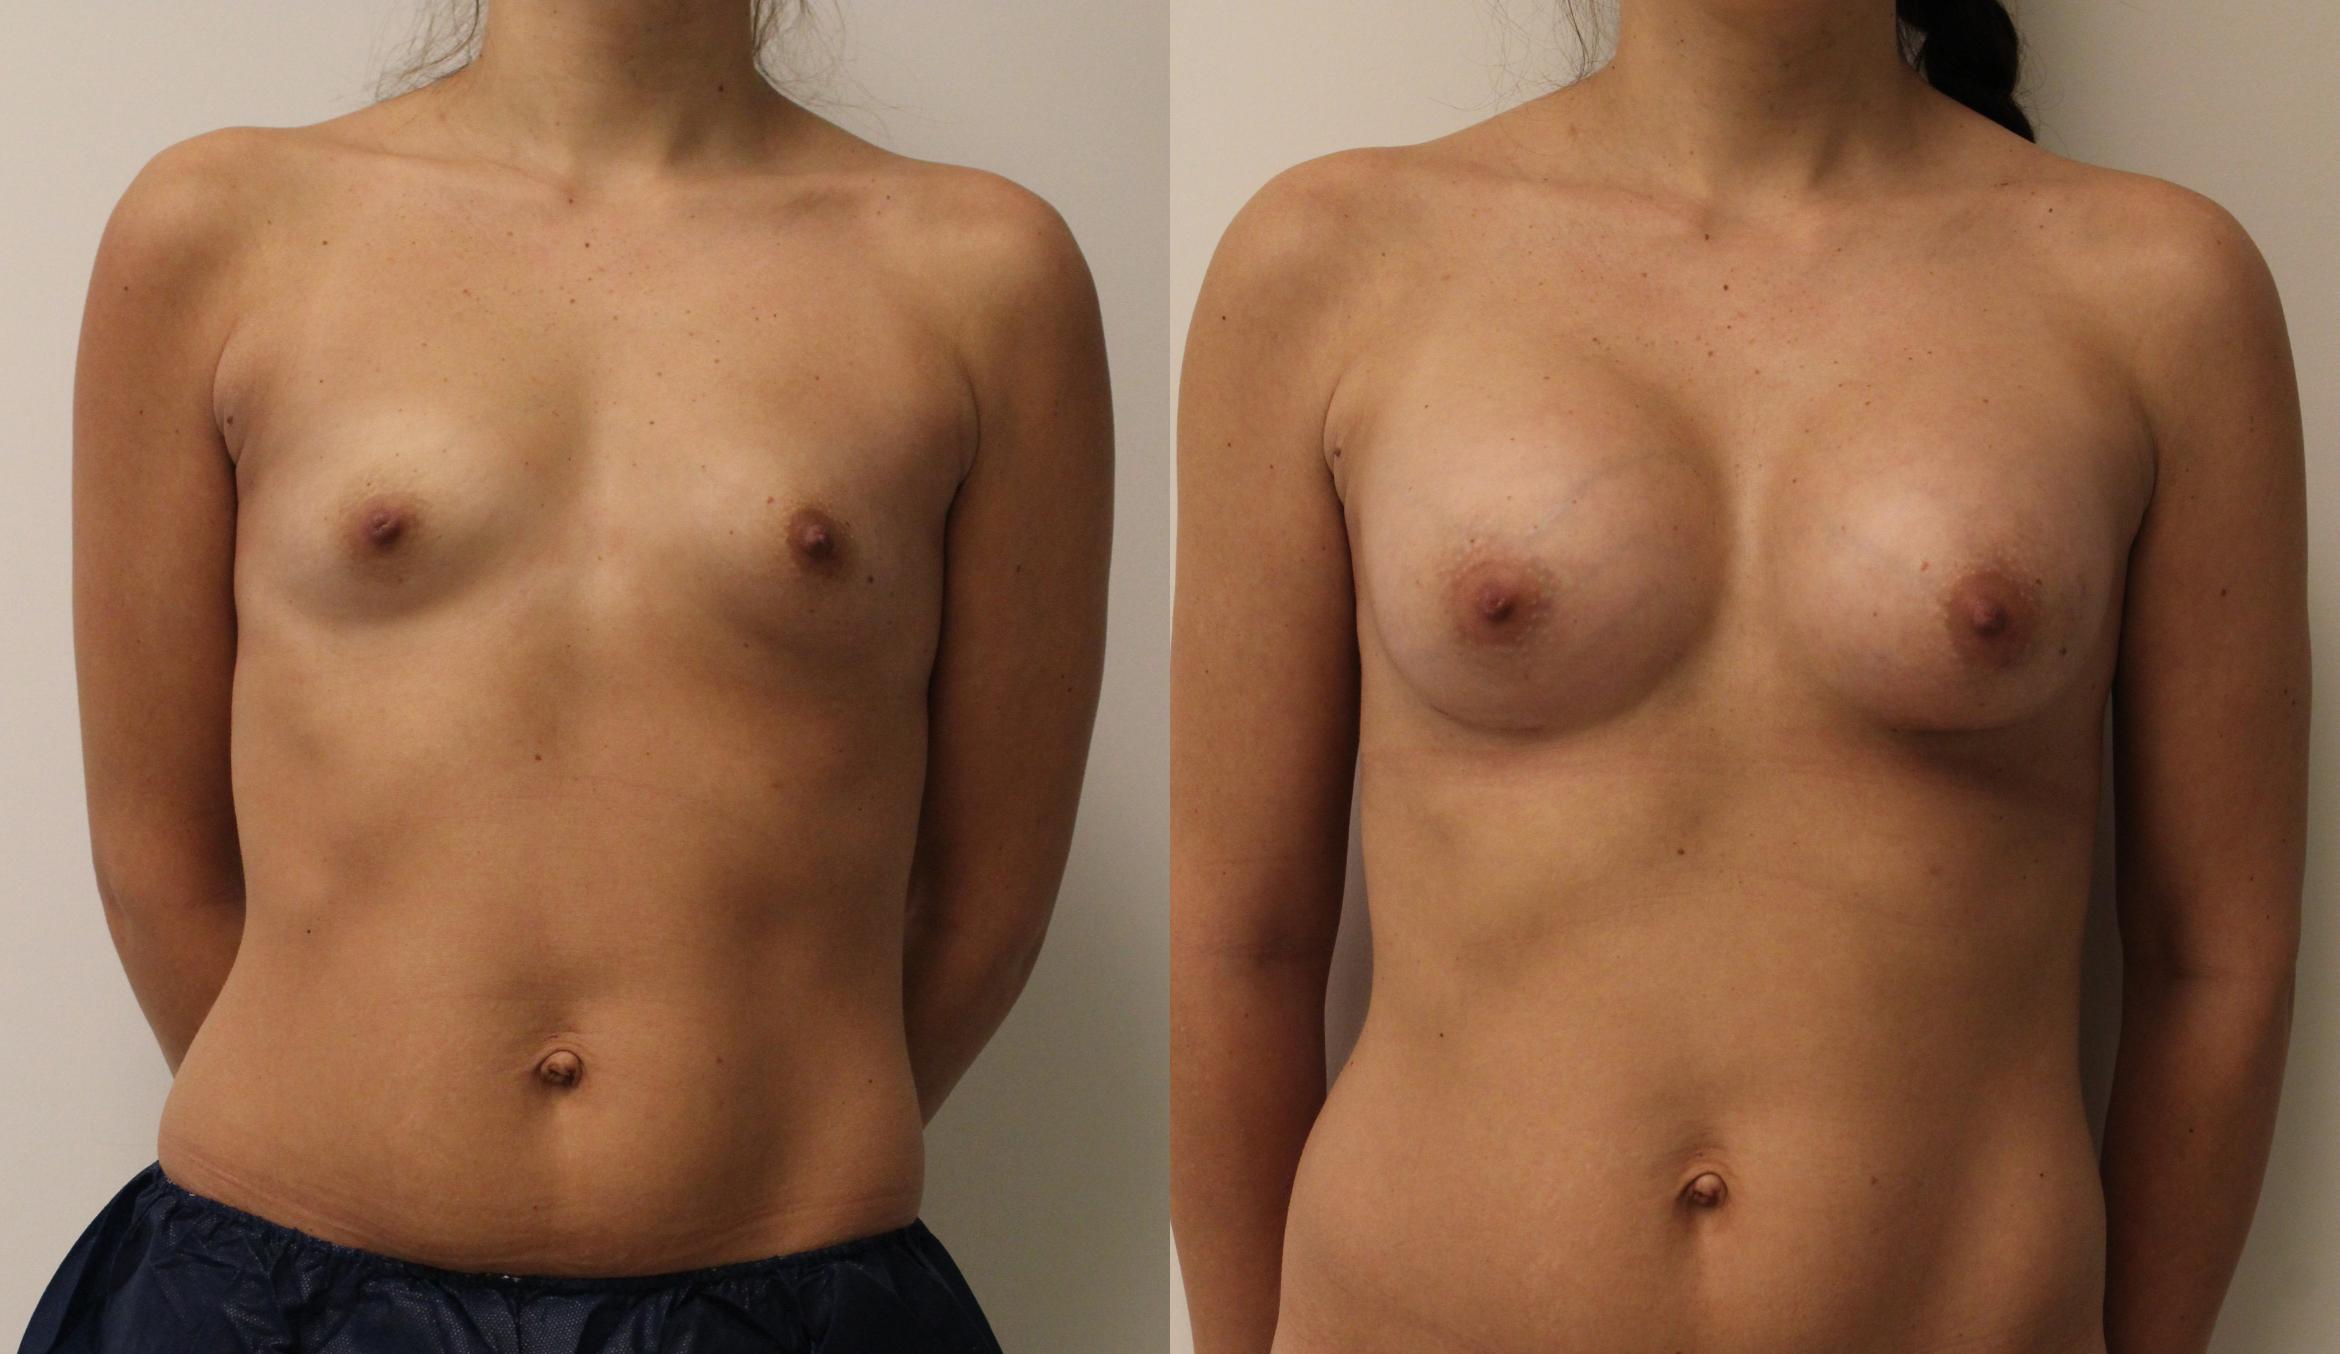 Breast implants with inverted nipples